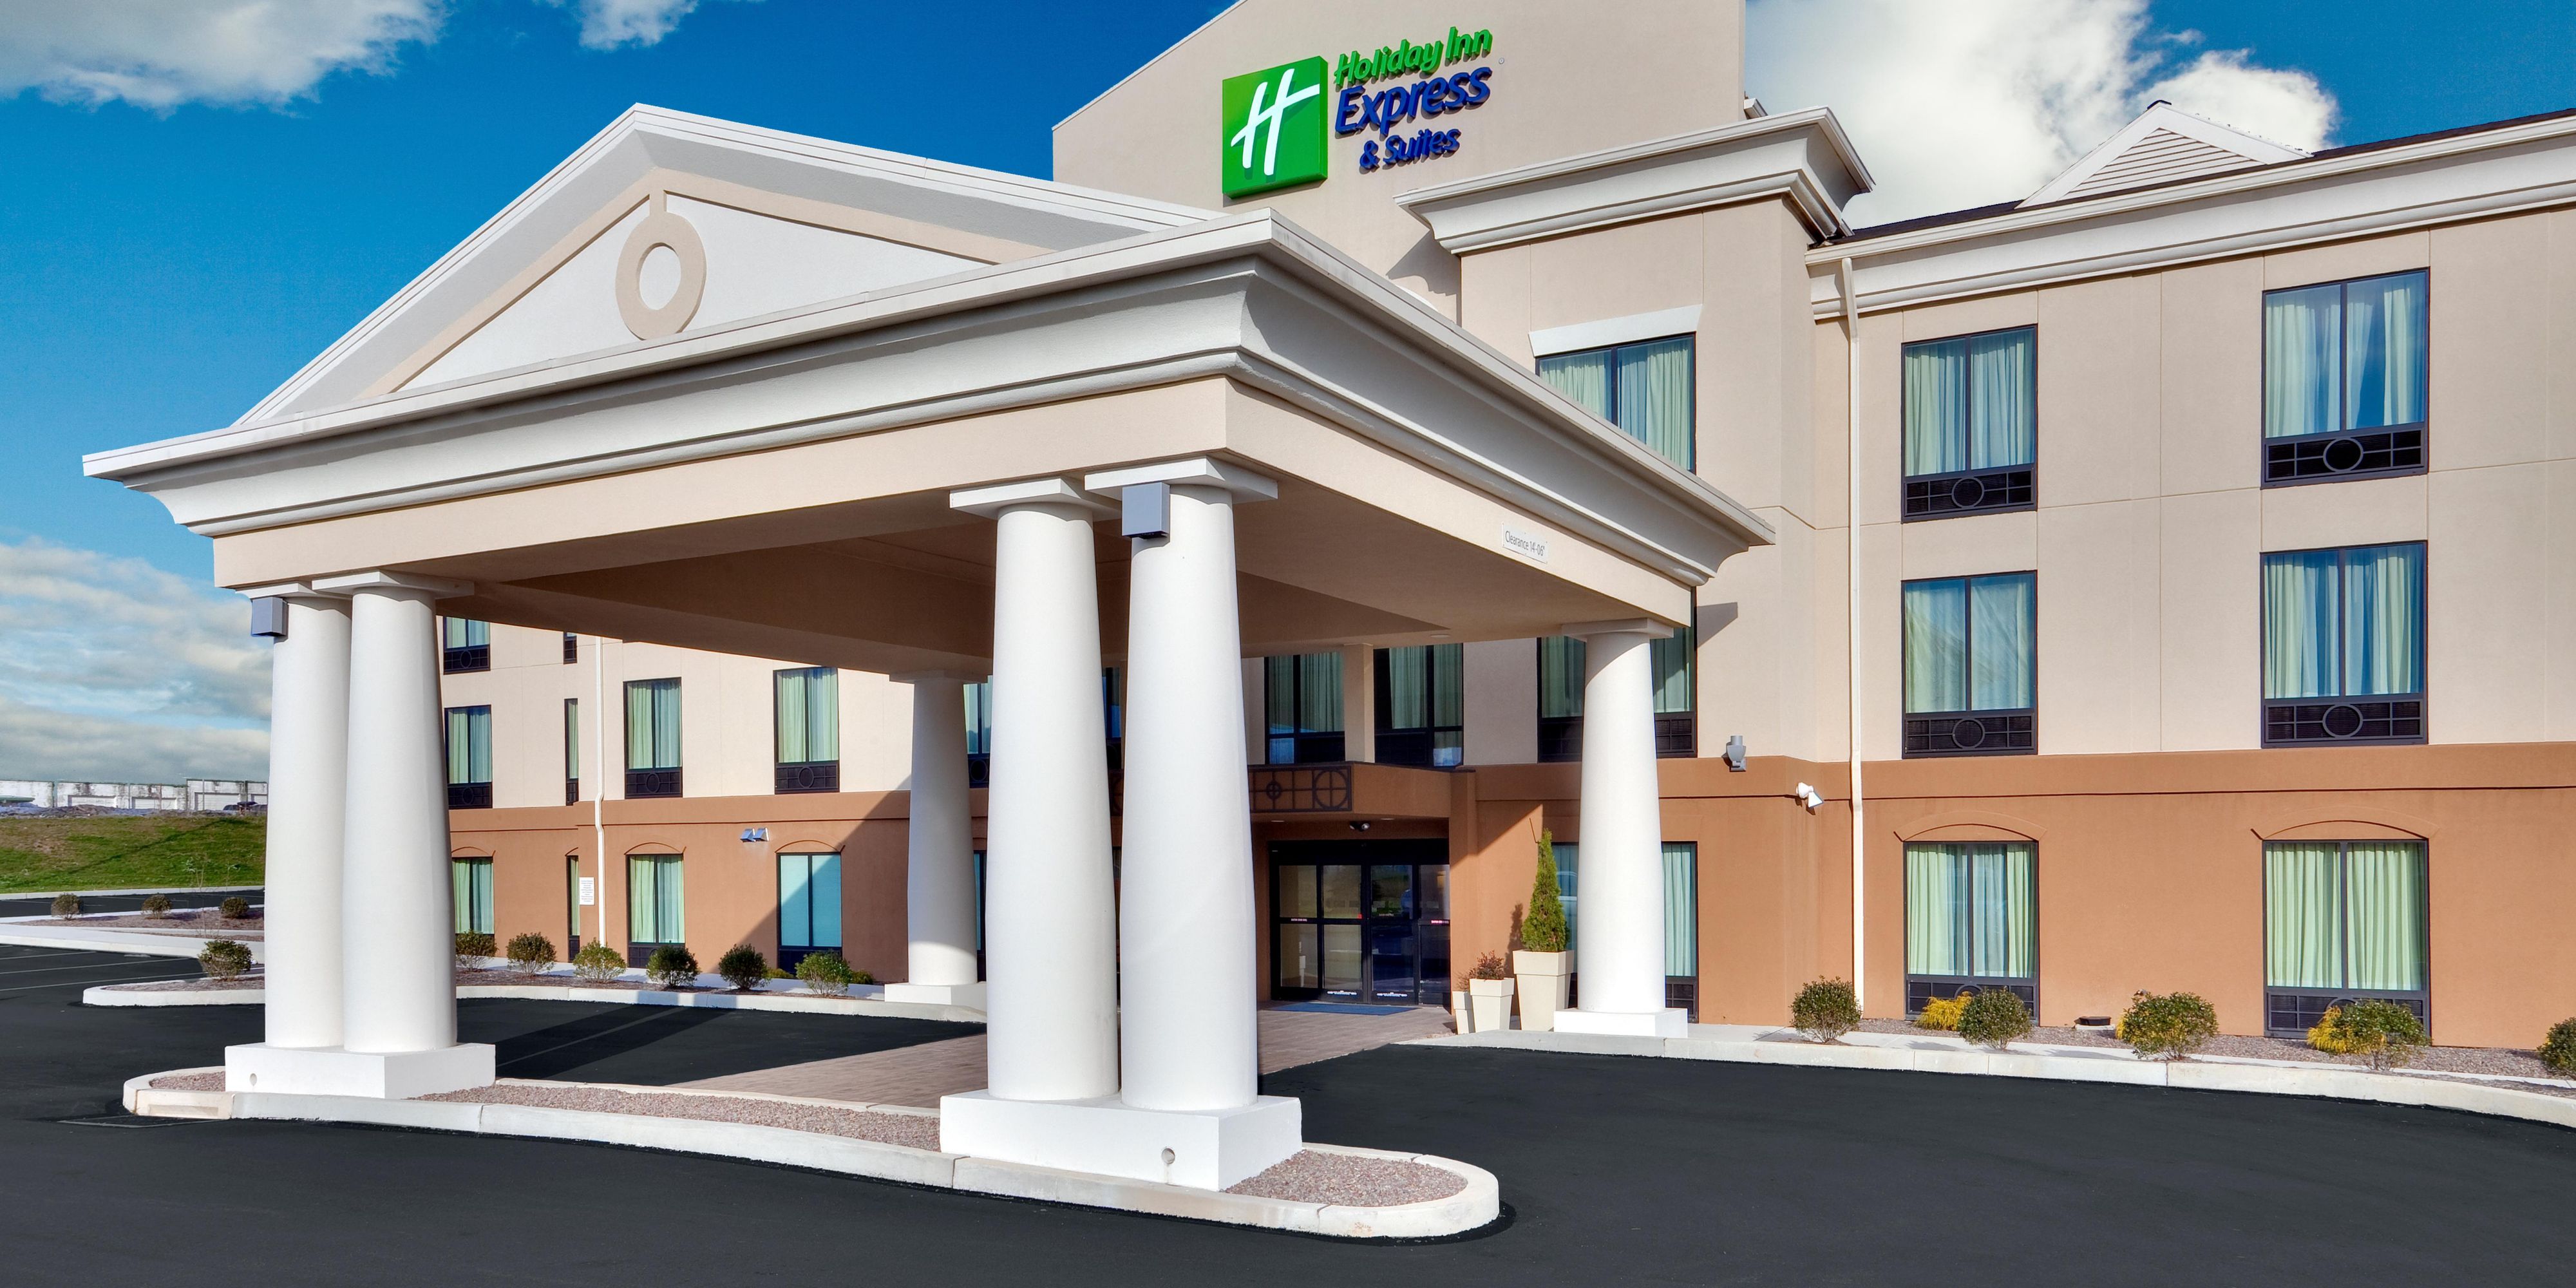 Let the Holiday Inn Express Lebanon, PA be the place your next meeting occurs. Our Sales Team can assist you with all your meeting needs. Call us today for details!